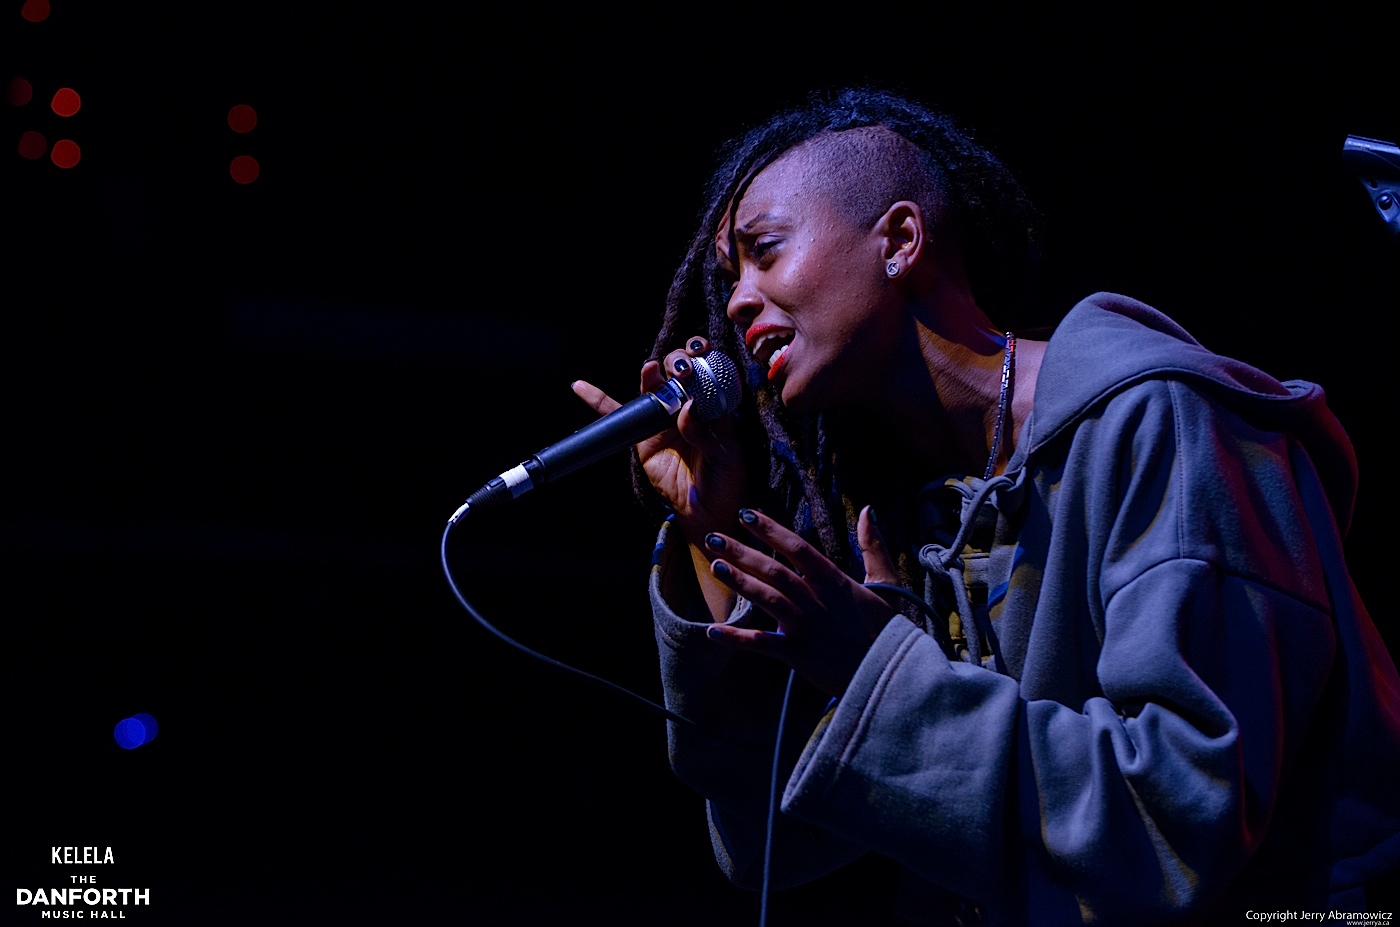 Kelela plays to a packed house at The Danforth Music Hall